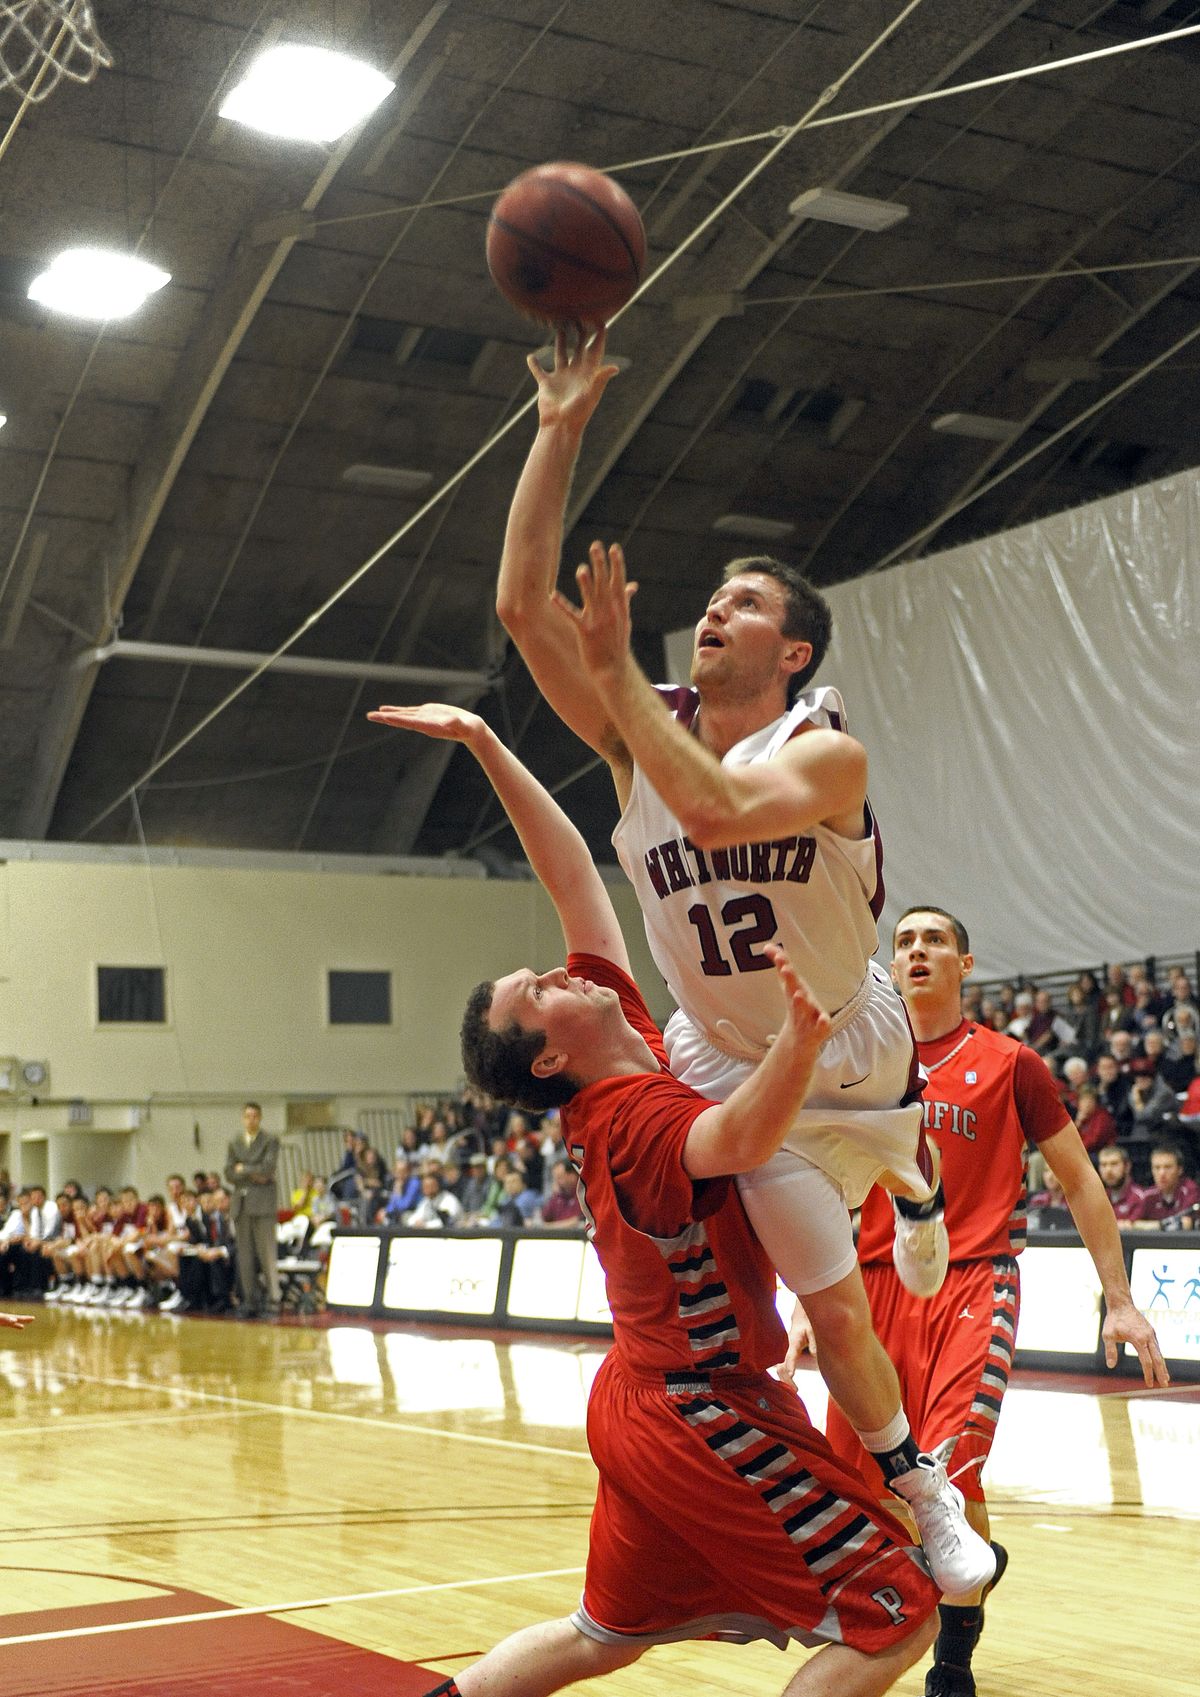 Whitworth’s Wade Gebbers goes over the top of Pacific’s Marc Eppinger for an early score. (Christopher Anderson)